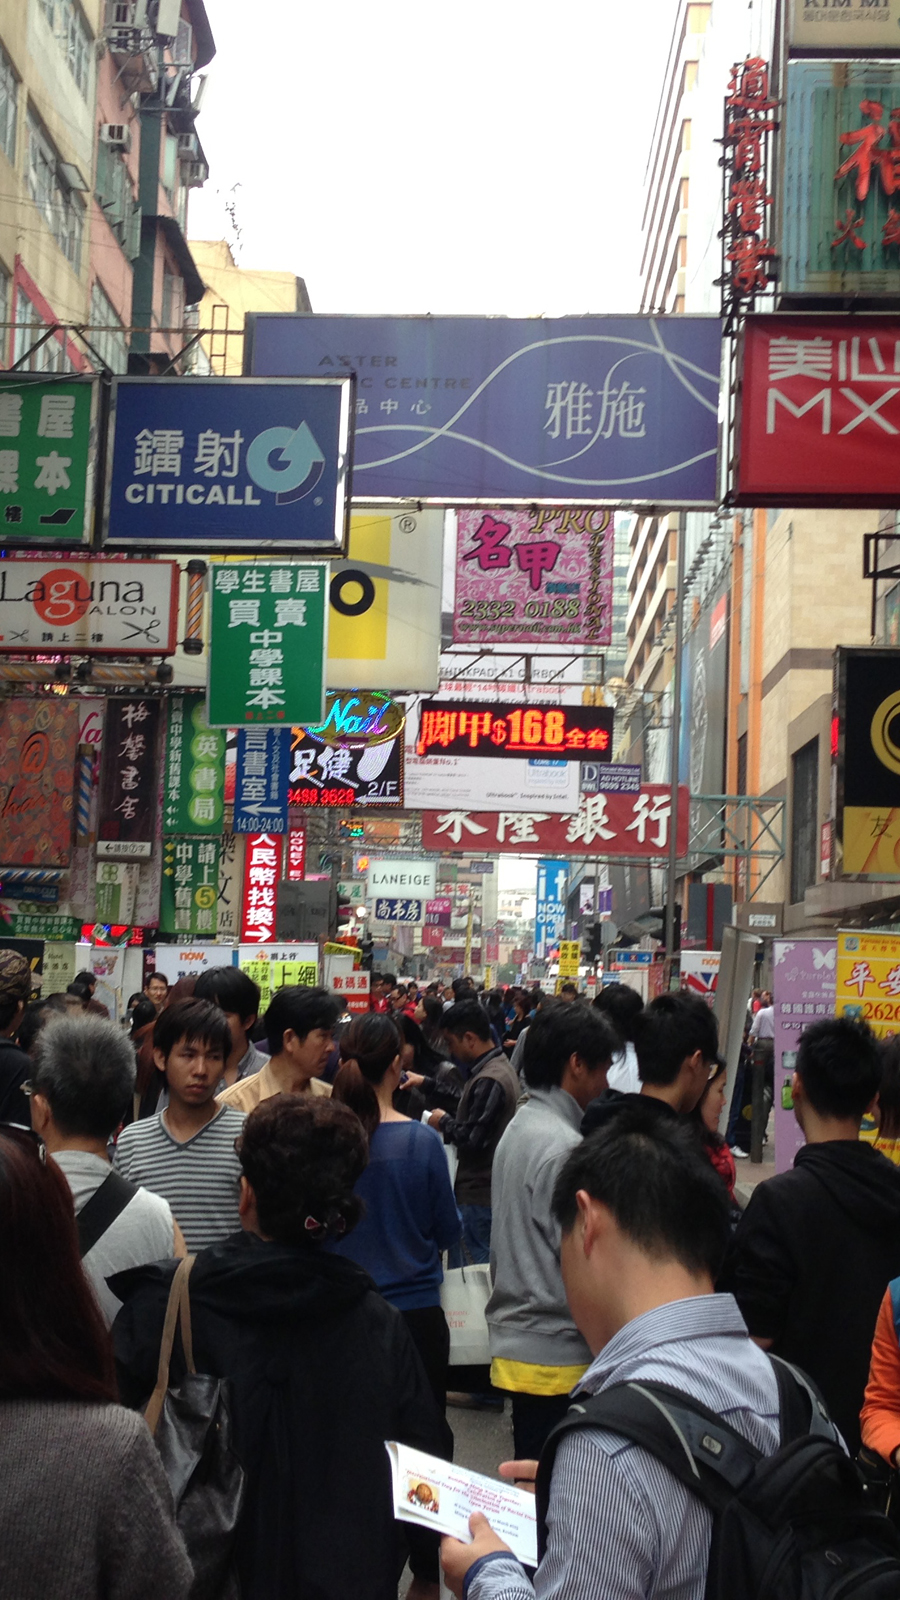 The busy streets of Mong Kok on a Sunday - and the busier signs. They get way busier at night, though.